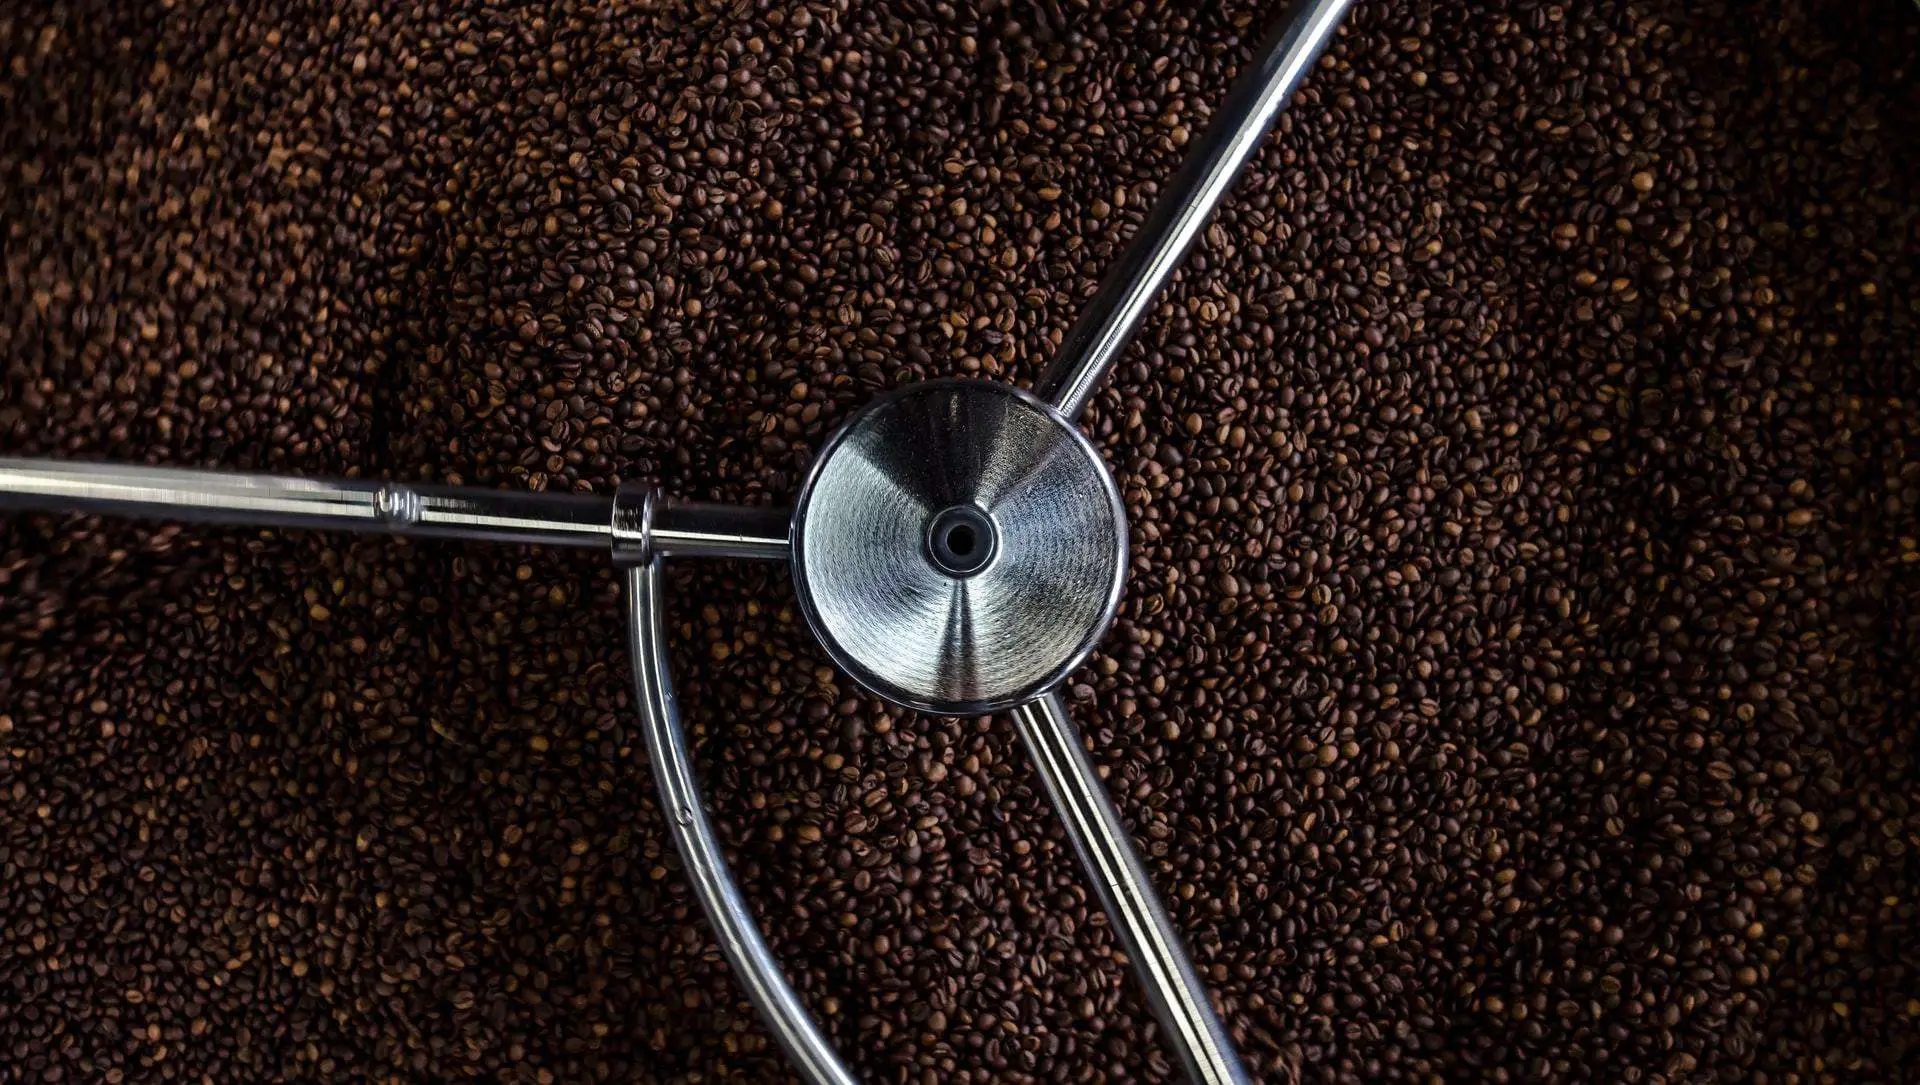 where to grind coffee beans